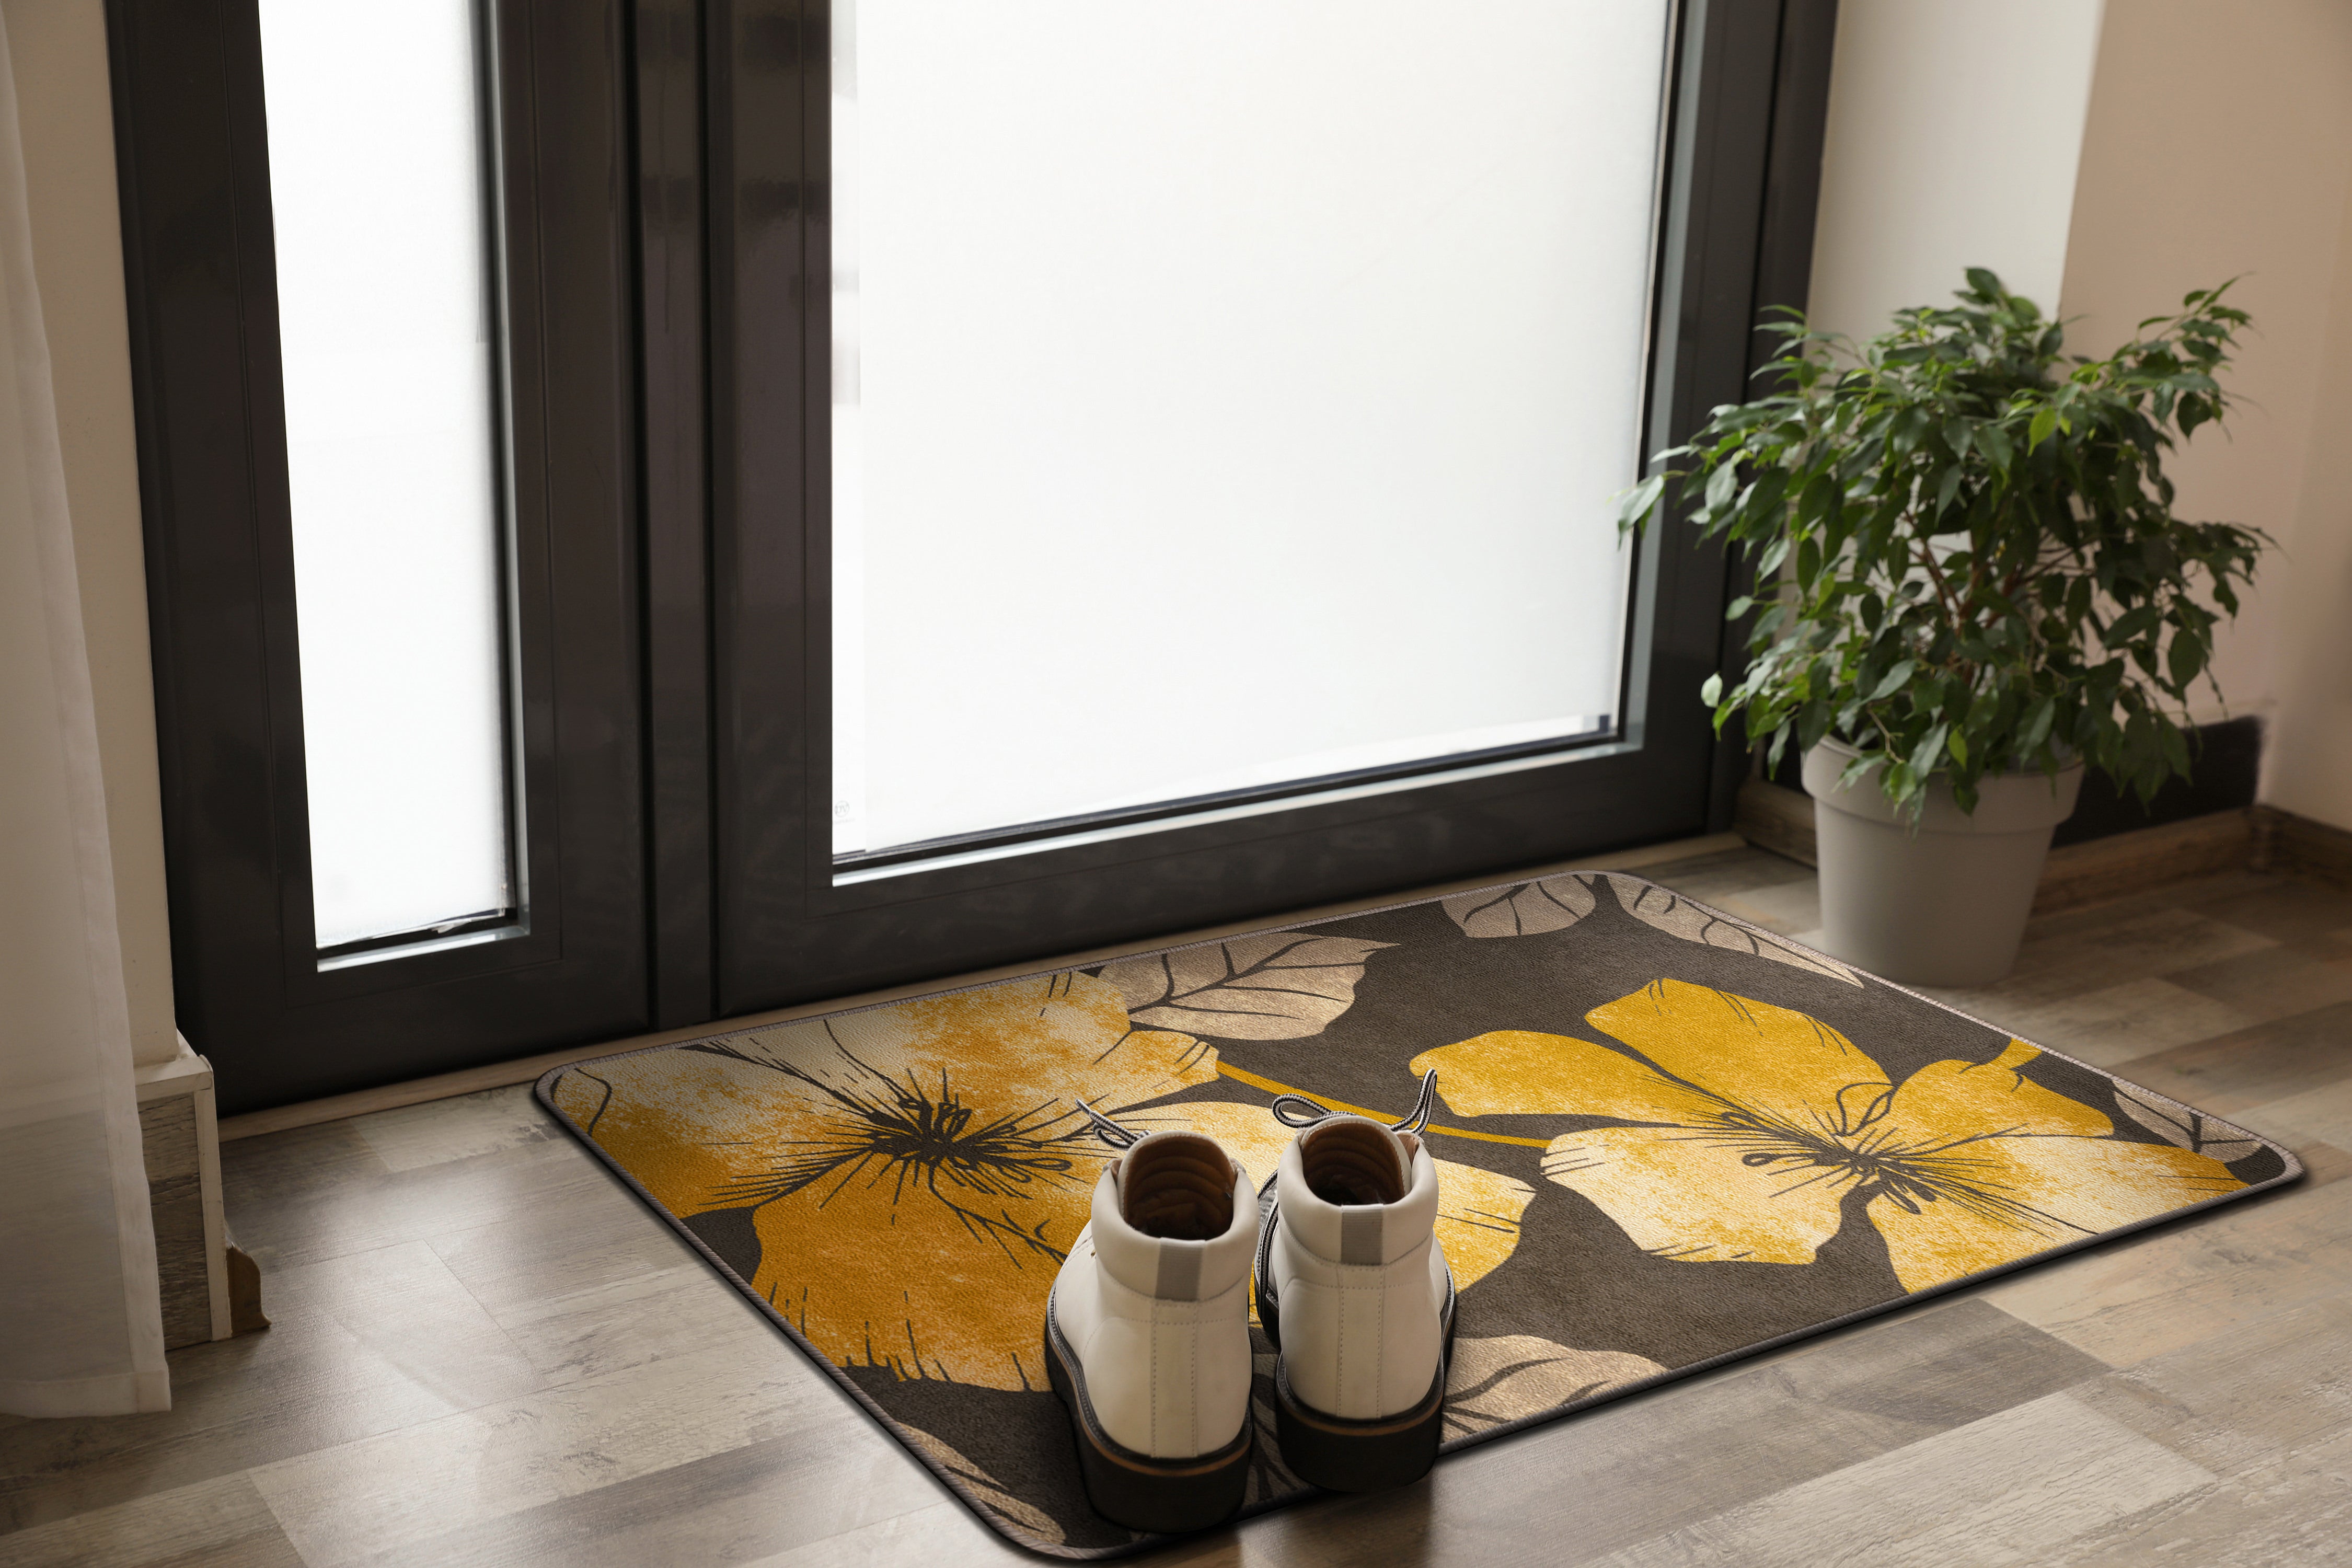 Floral Non-Slip Area Rugs Yellow